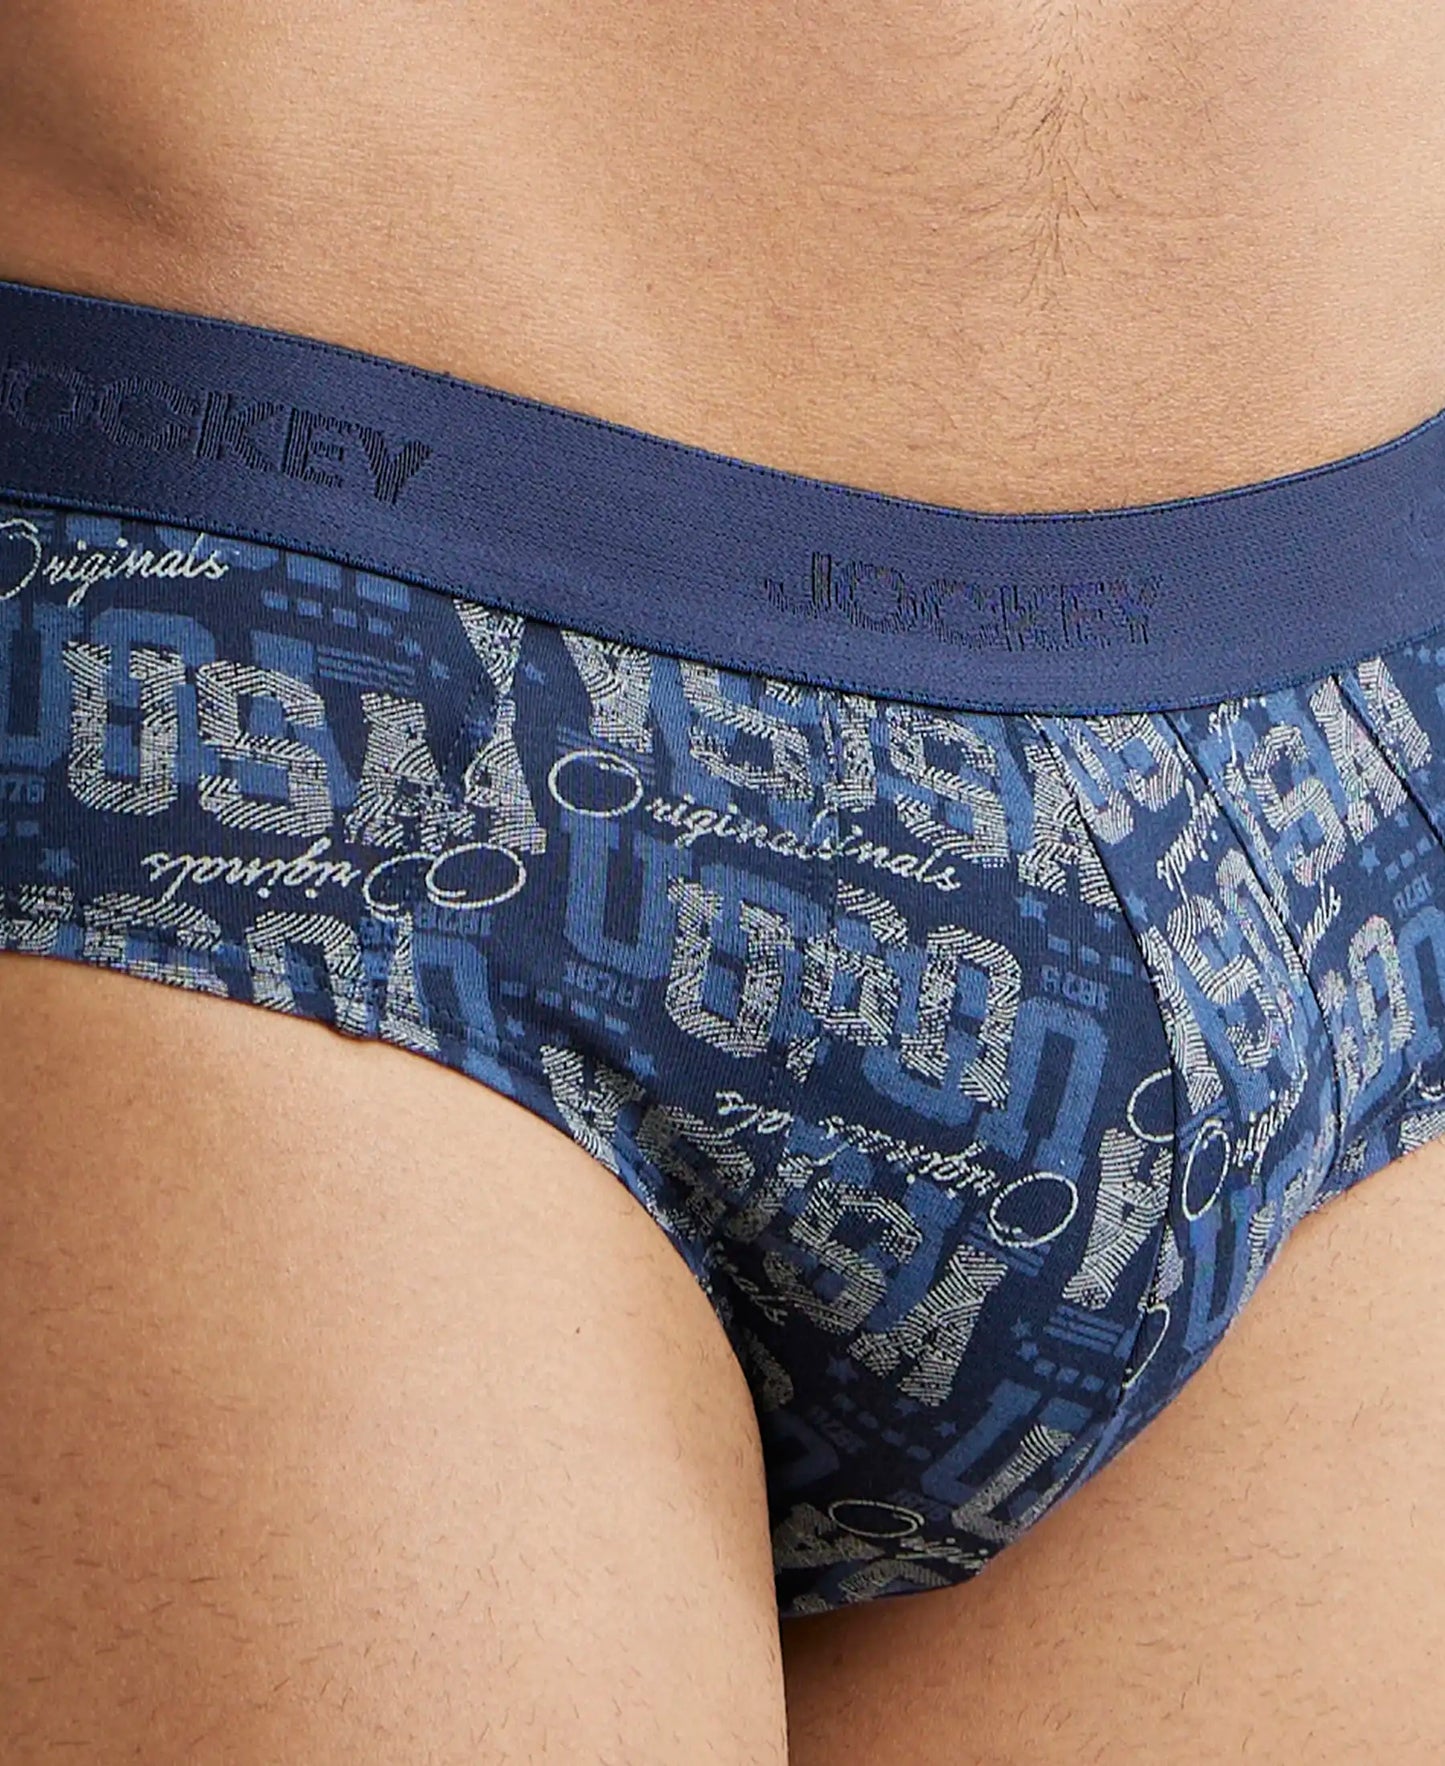 Super Combed Cotton Printed Brief with Ultrasoft Waistband - Navy Seaport Teal-14